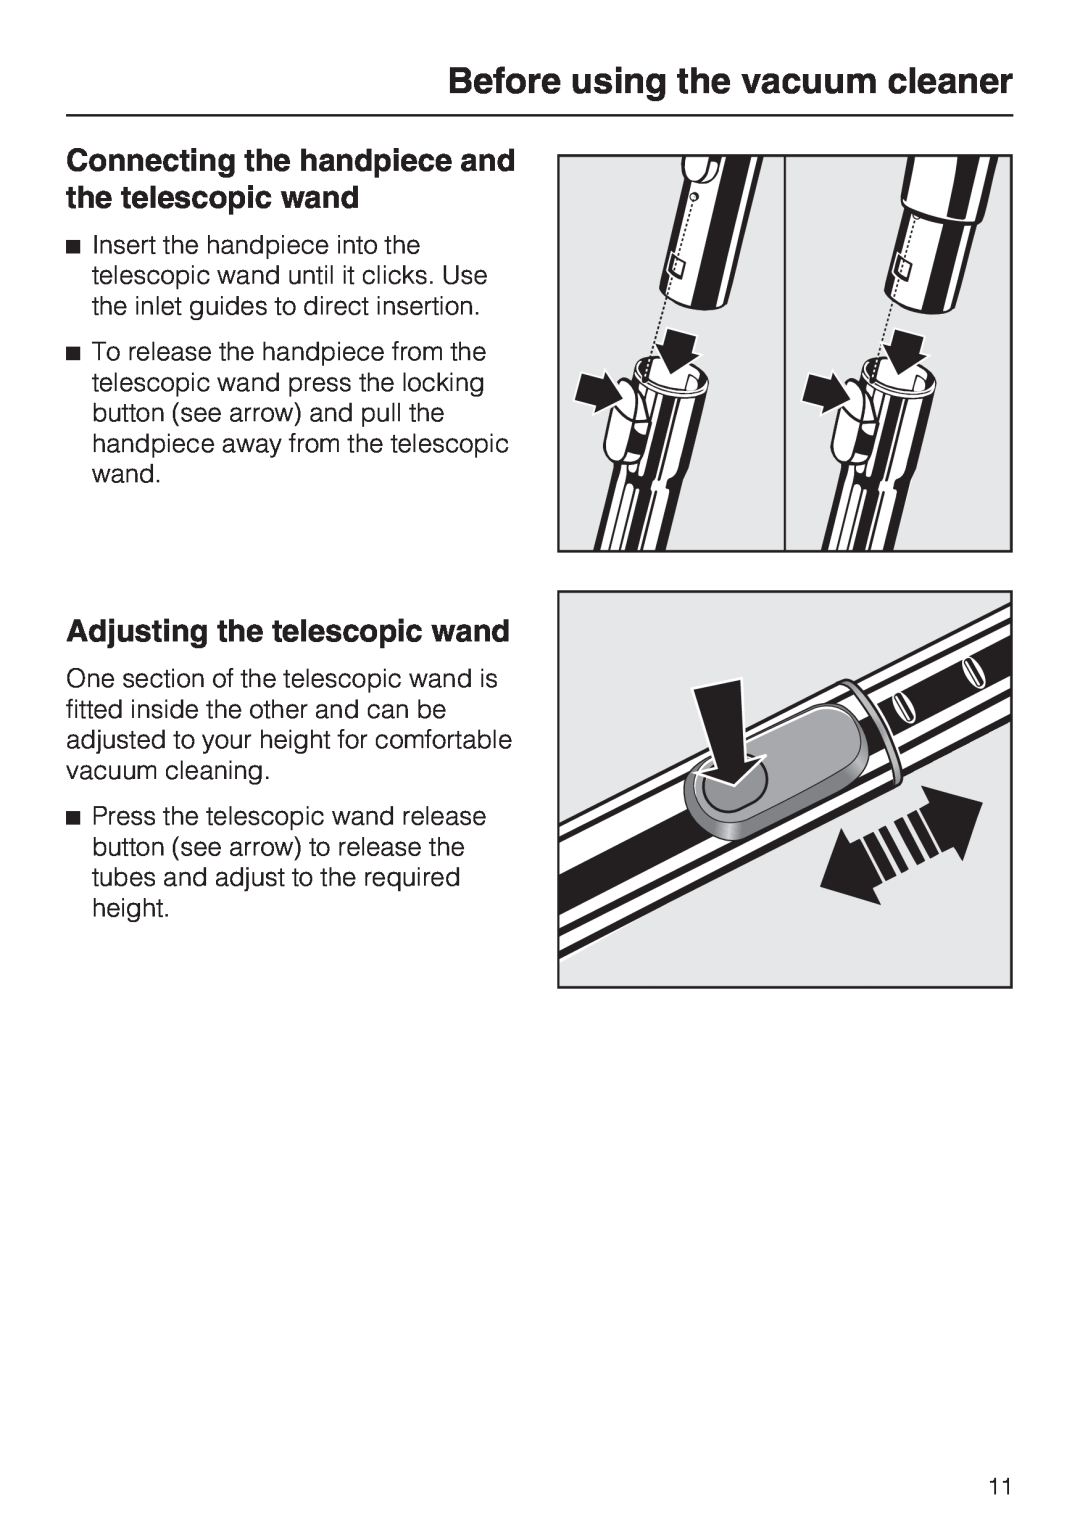 NEC S 5000 operating instructions Connecting the handpiece and the telescopic wand, Adjusting the telescopic wand 